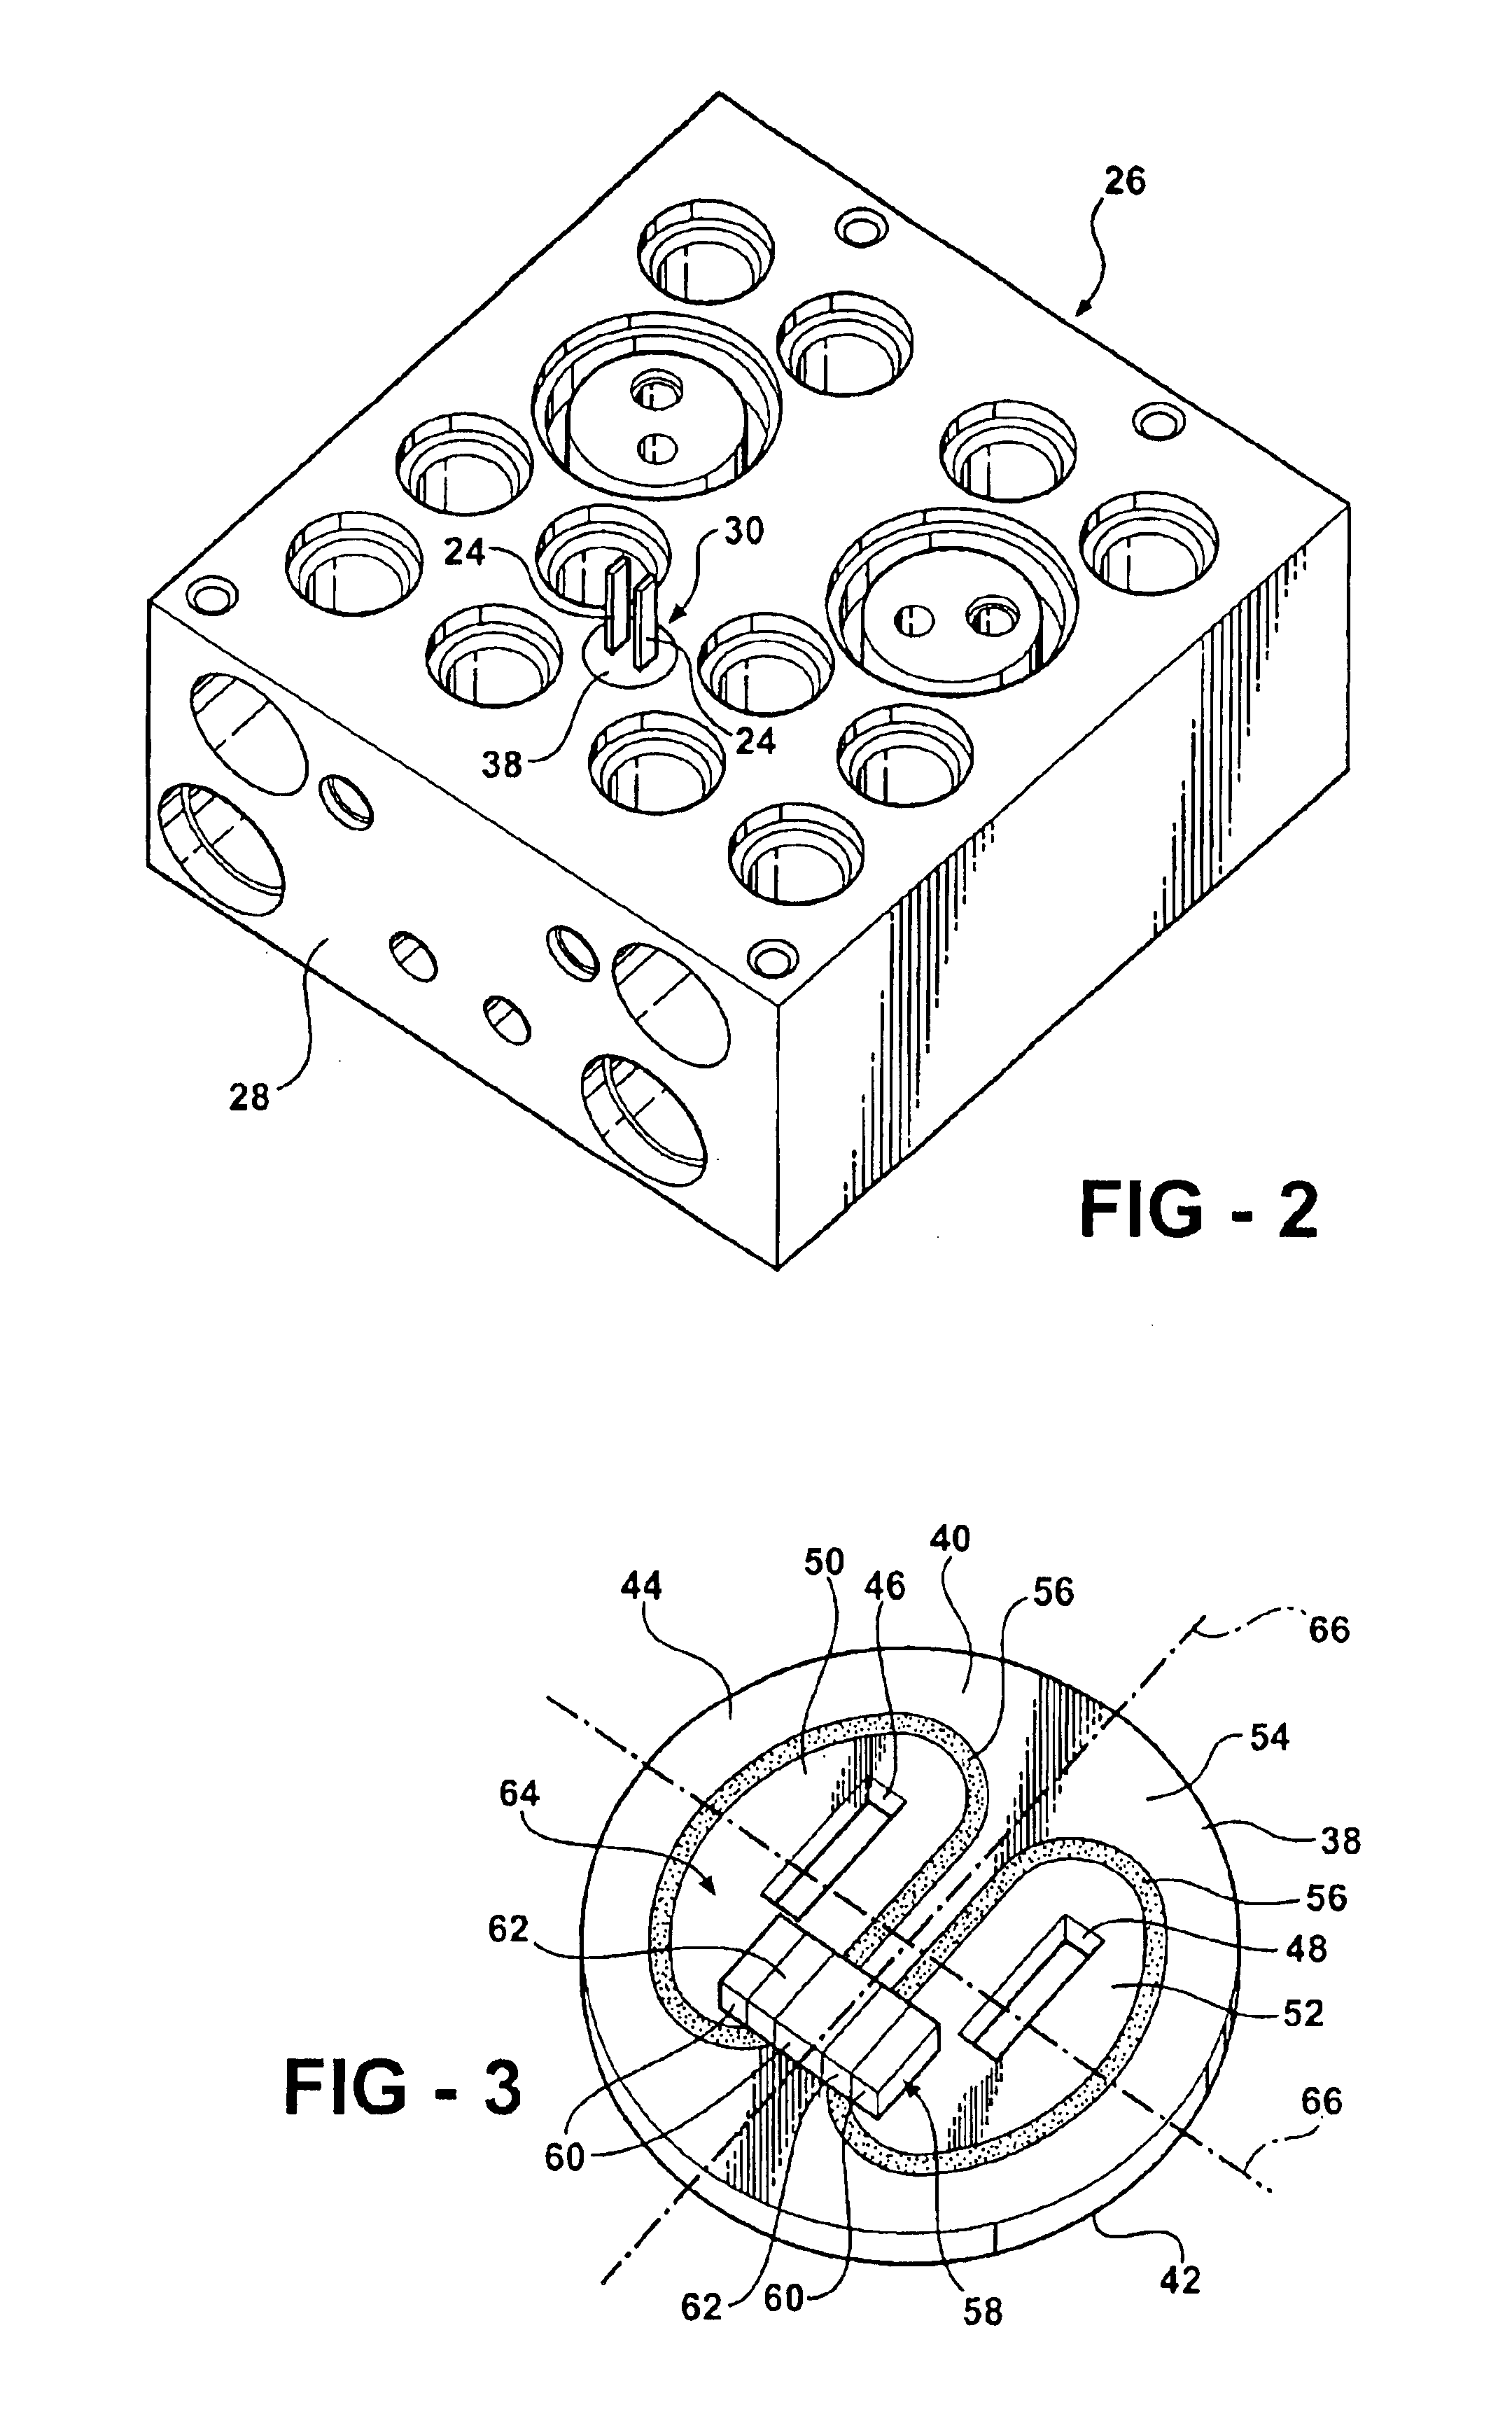 Motor assembly having improved electromagnetic noise filtering and dissipation